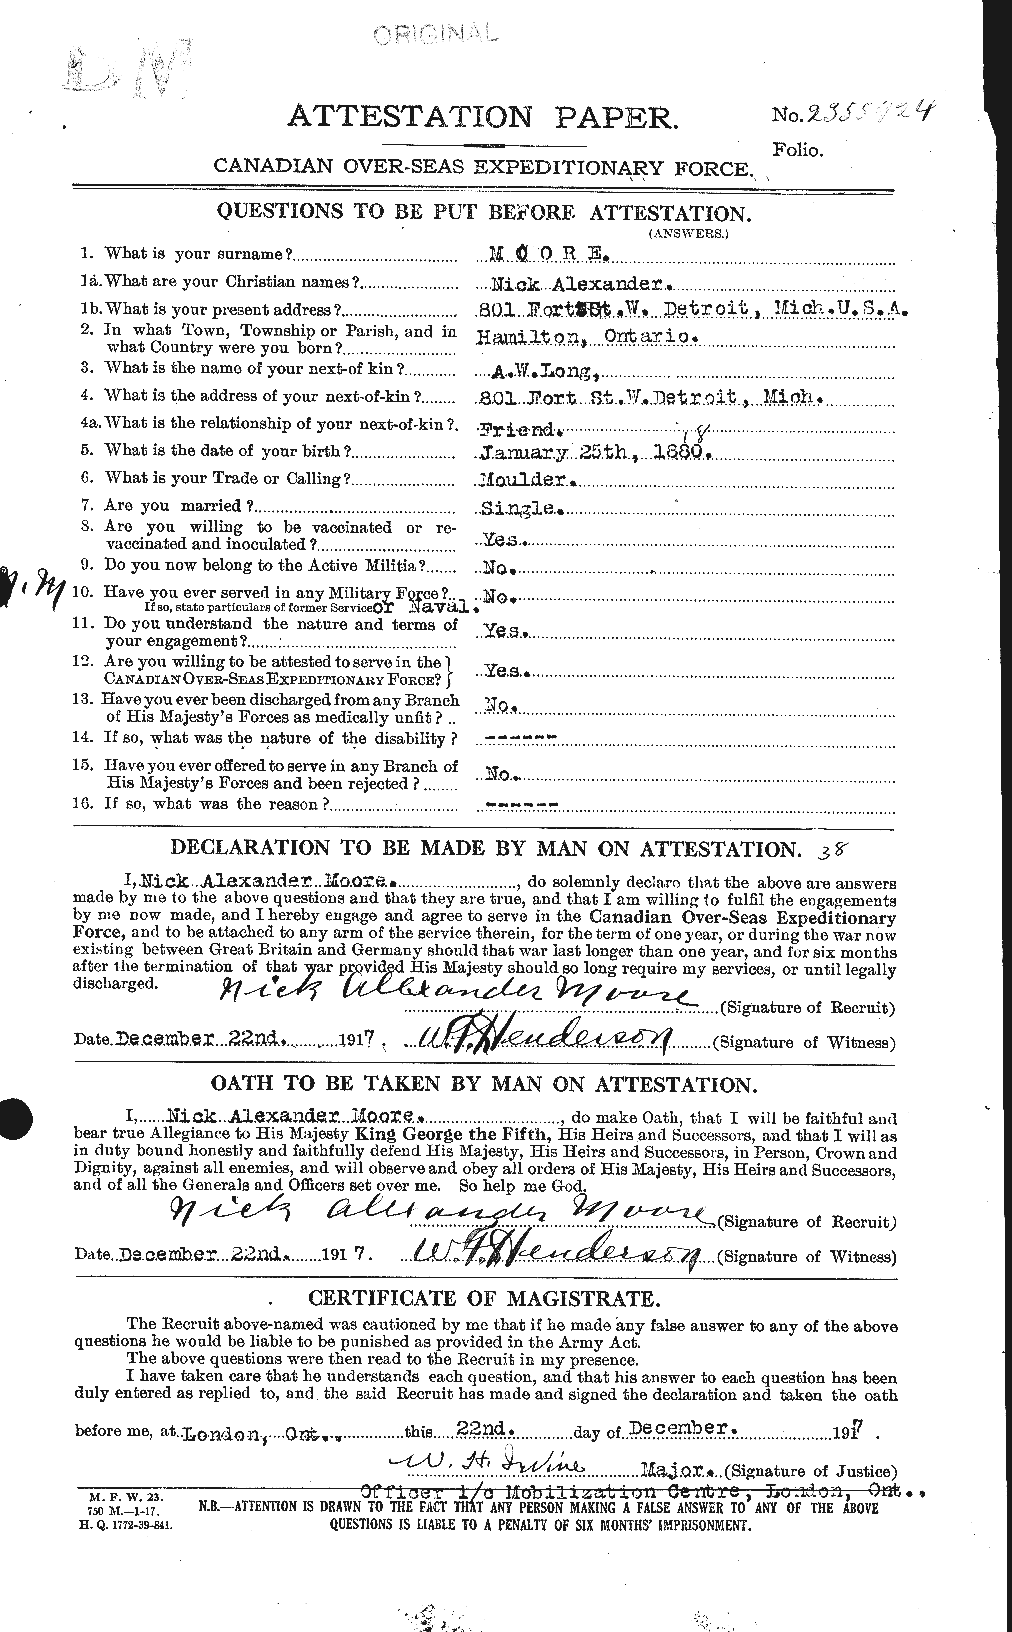 Personnel Records of the First World War - CEF 503452a